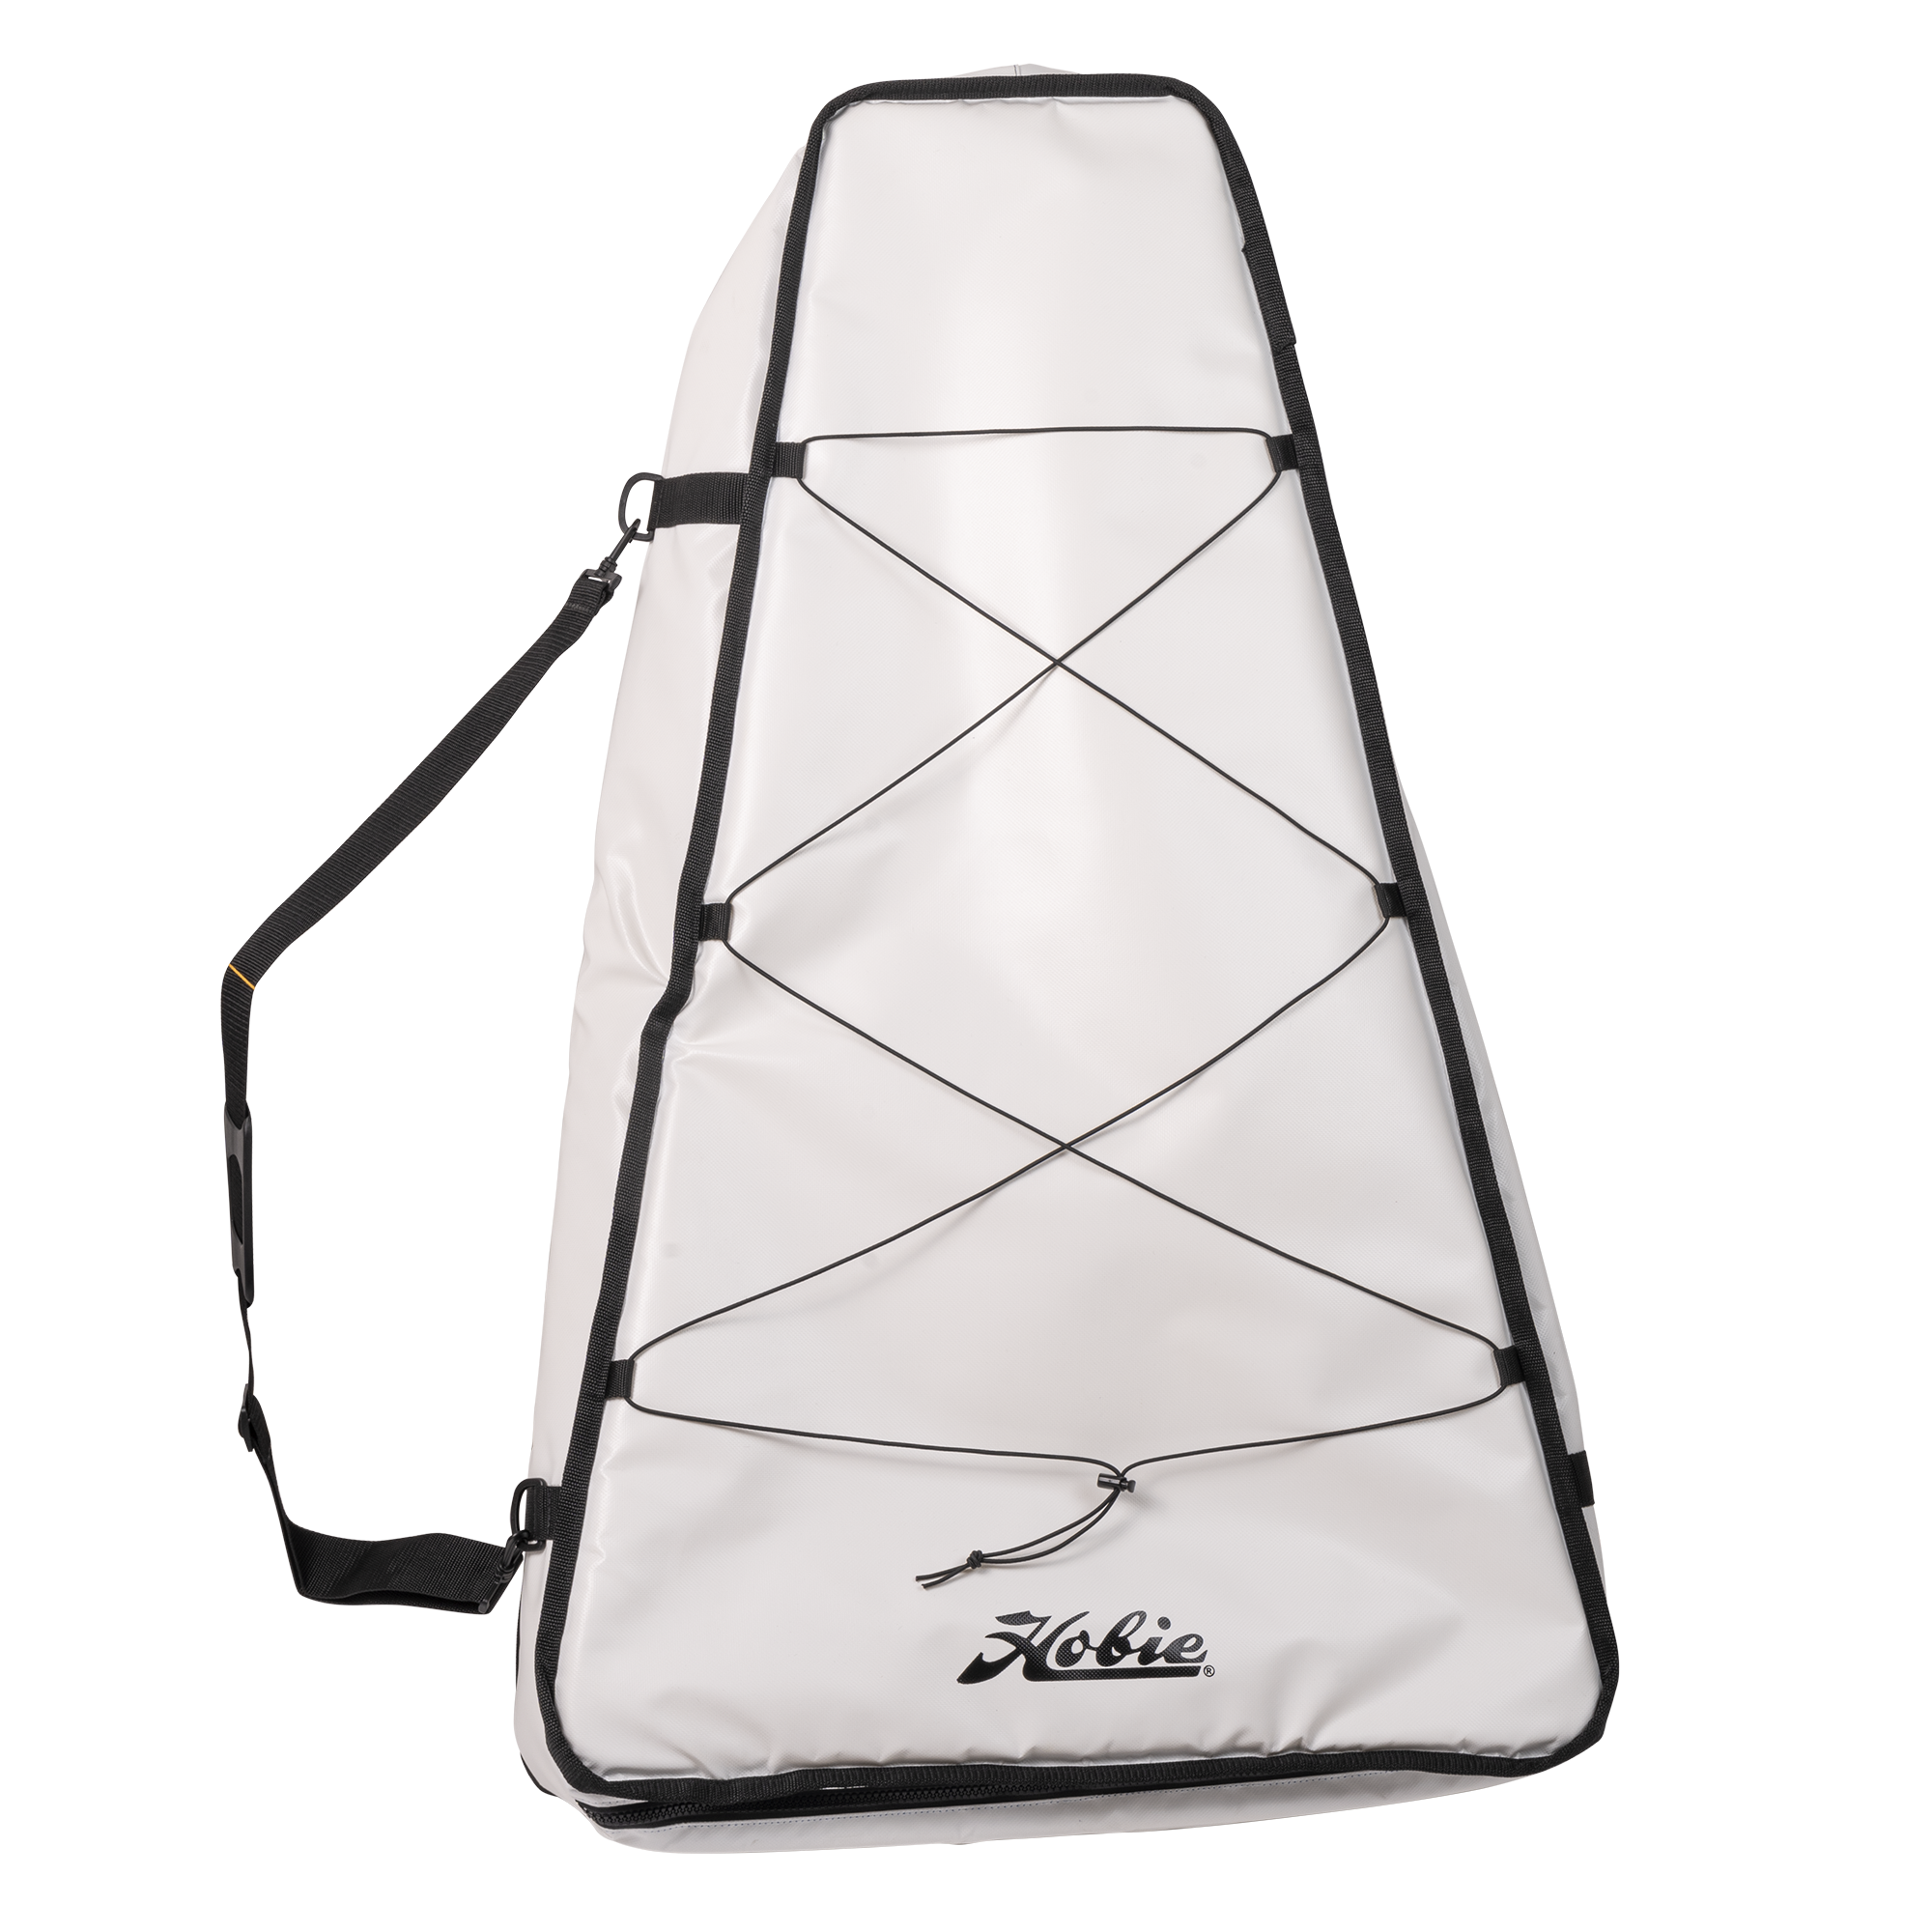 Hobie Kayak Soft Cooler Fish Bag, Extra Large – Totally Immersed Watersports